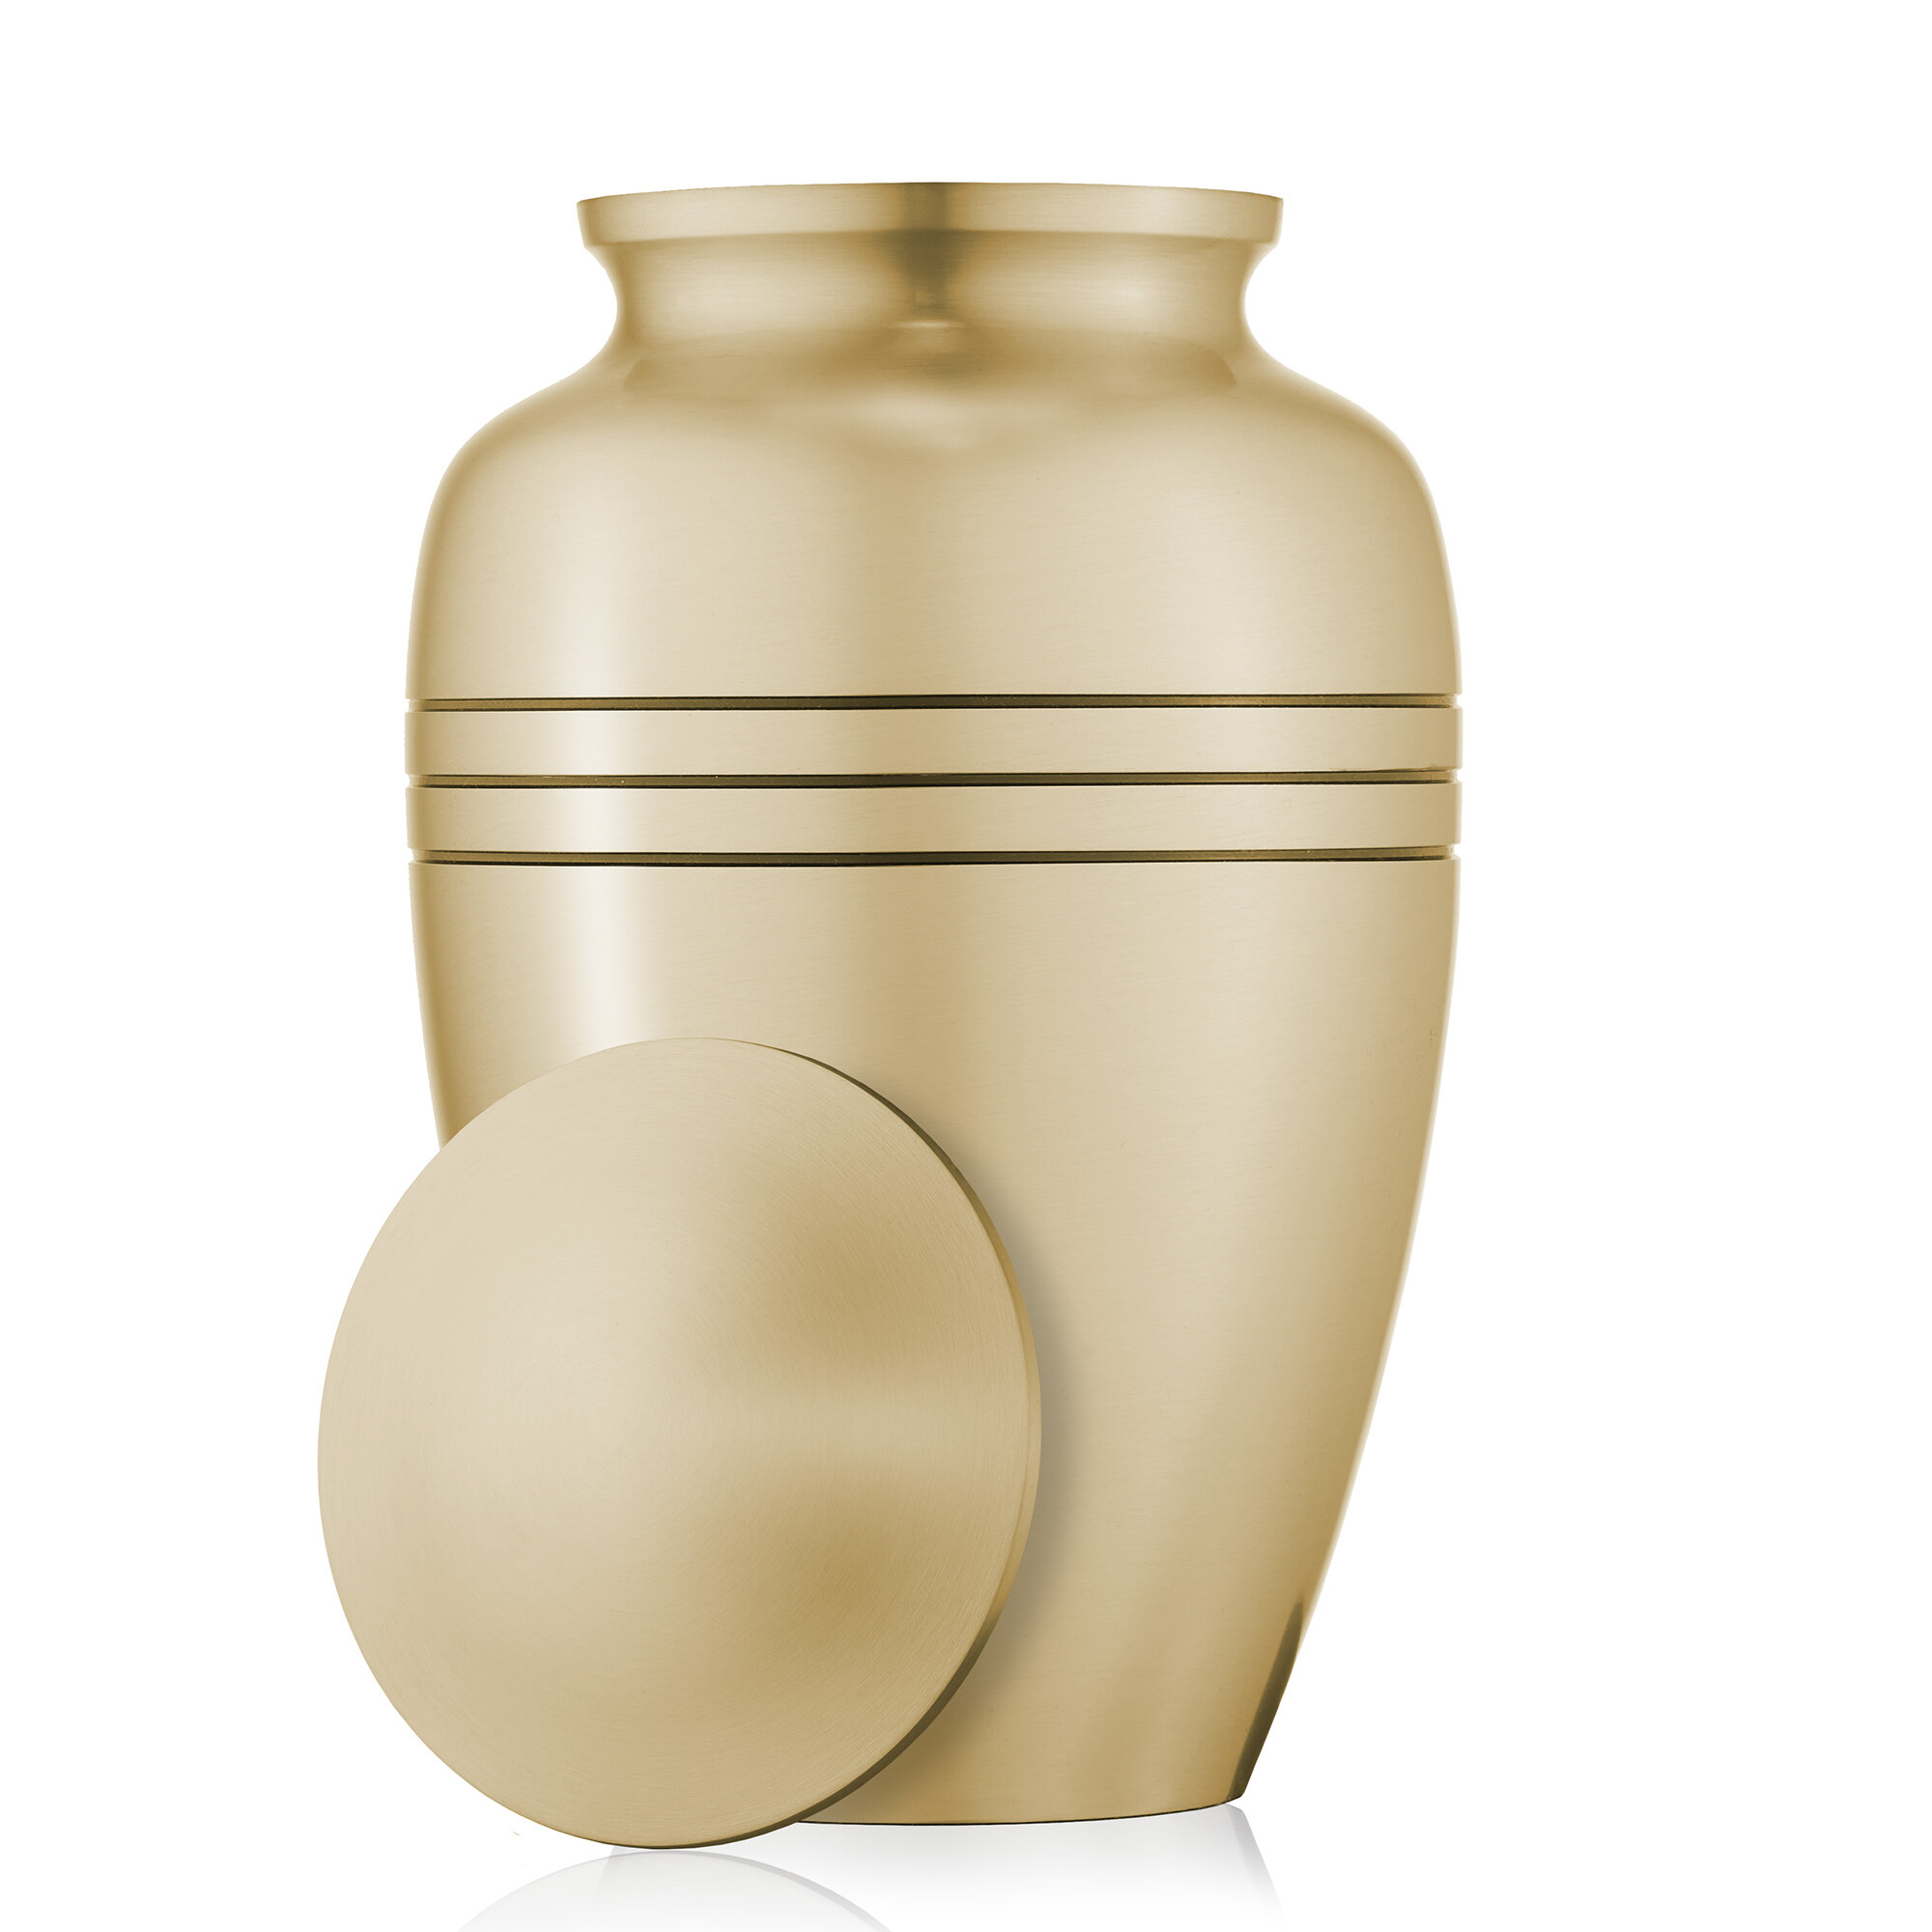 Reminded Adult Cremation Memorial Urn for Human Ashes, Gold with Black